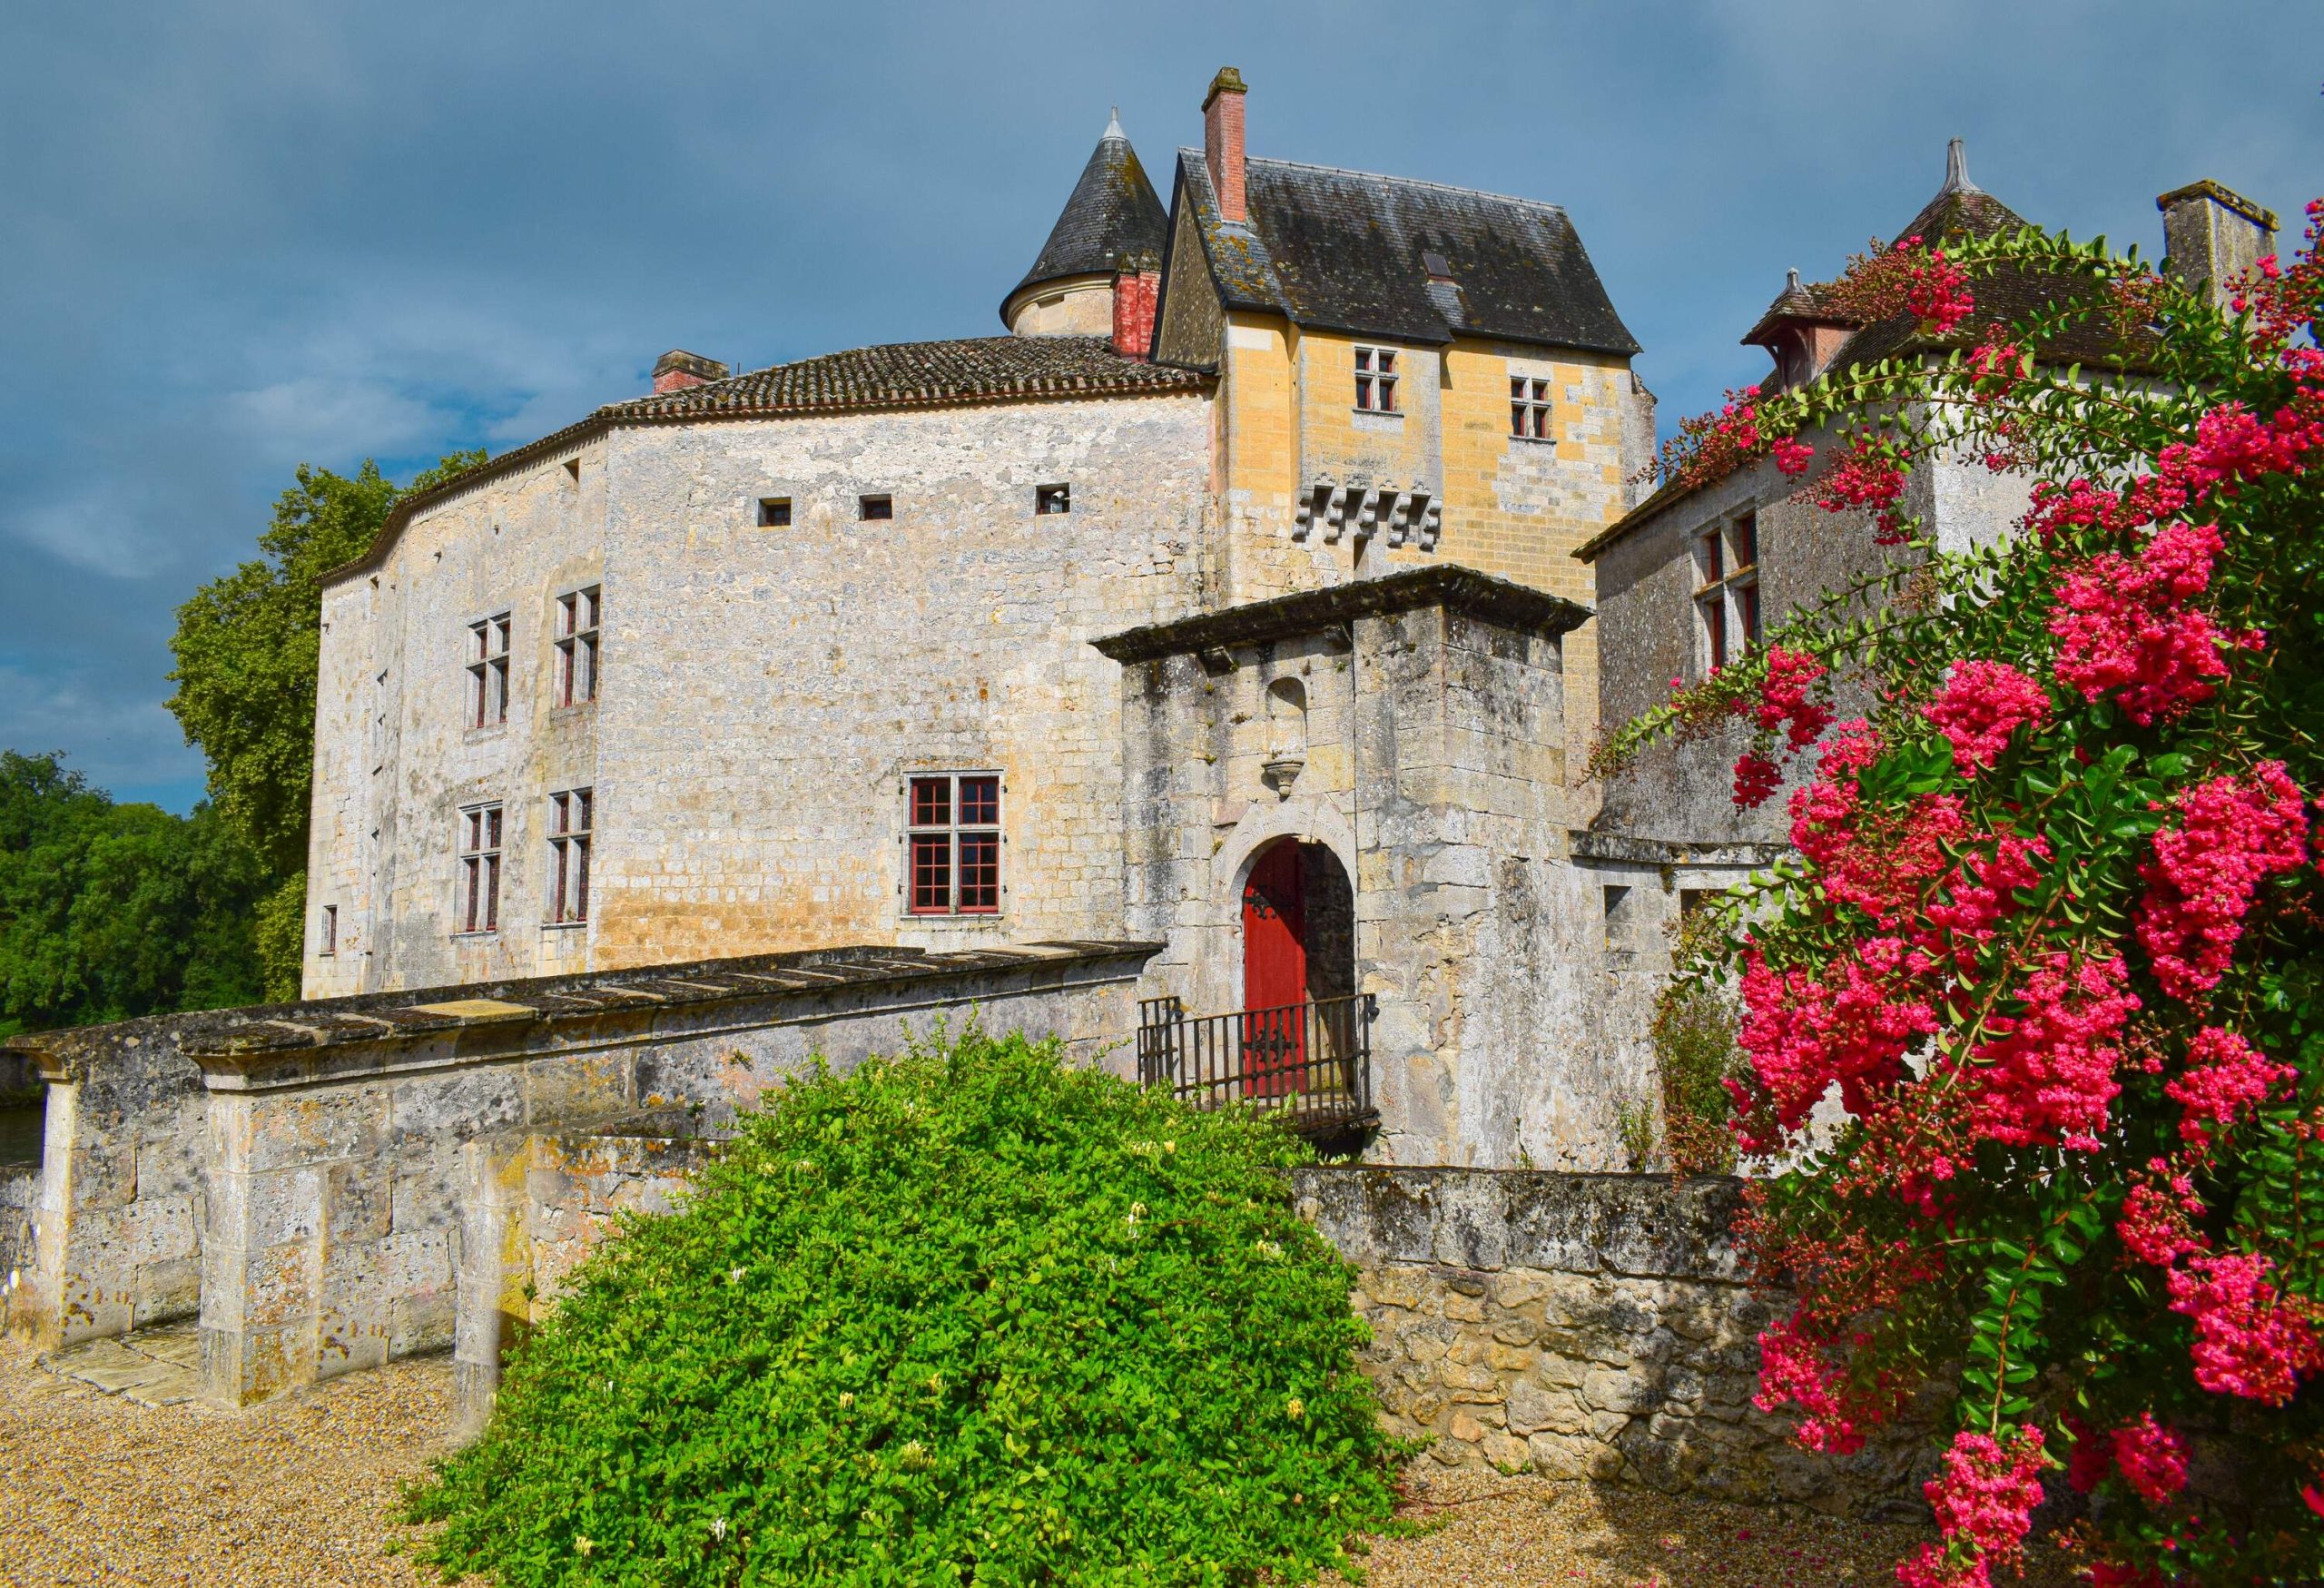 A historic building in the French Romanesque style that is adorned with colourful plants.